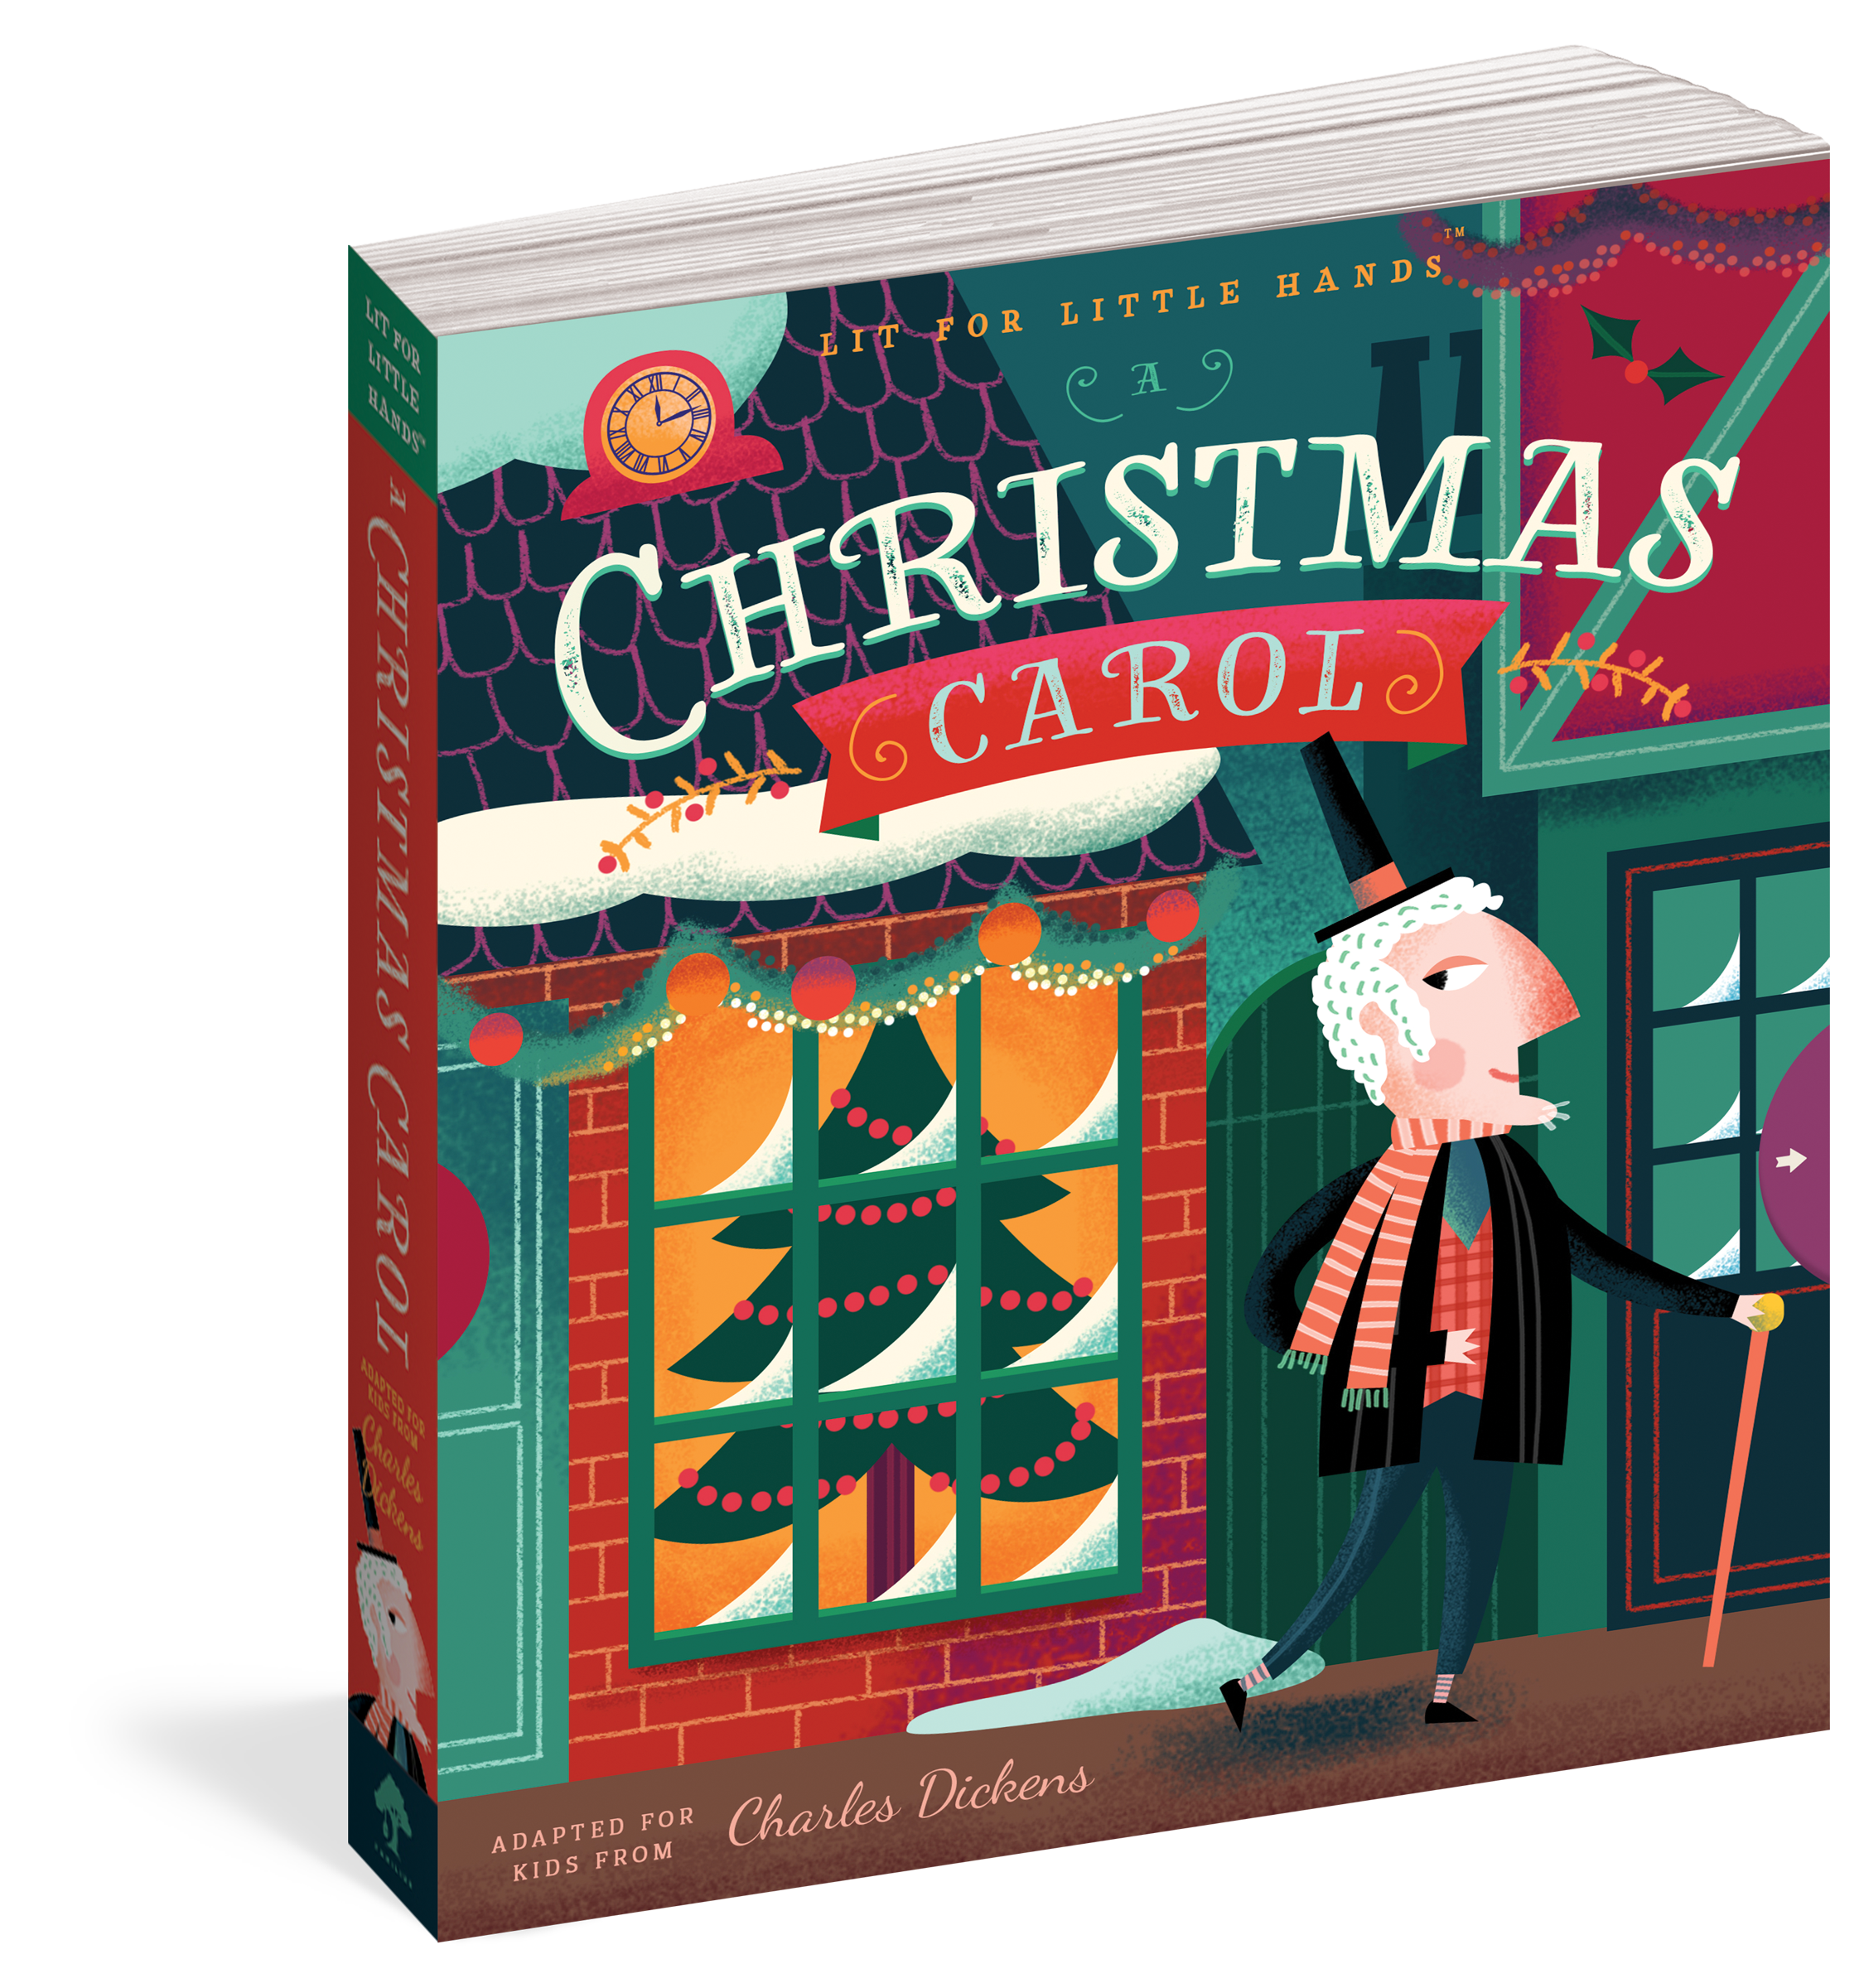 The cover of the board book Lit for Little Hands: A Christmas Carol.